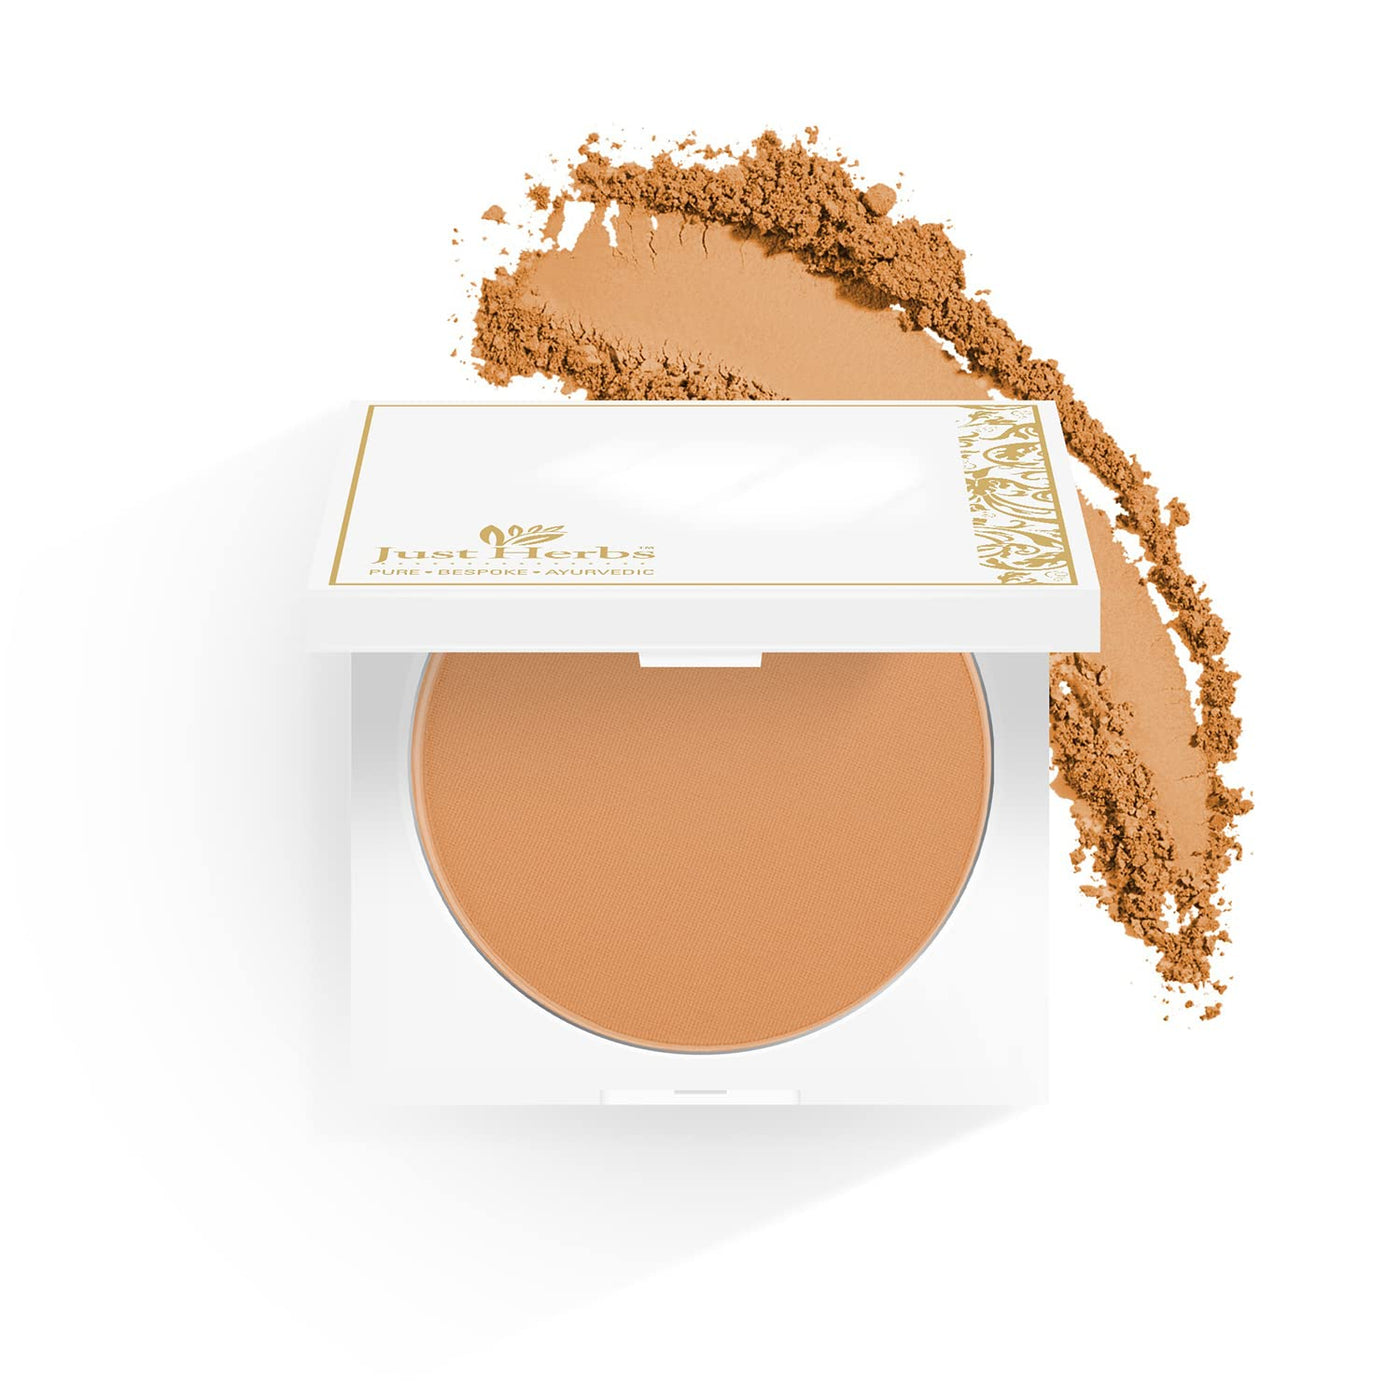 Mattifying and Hydrating SPF 15+ Compact Powder with Rice Starch & Liquorice Root